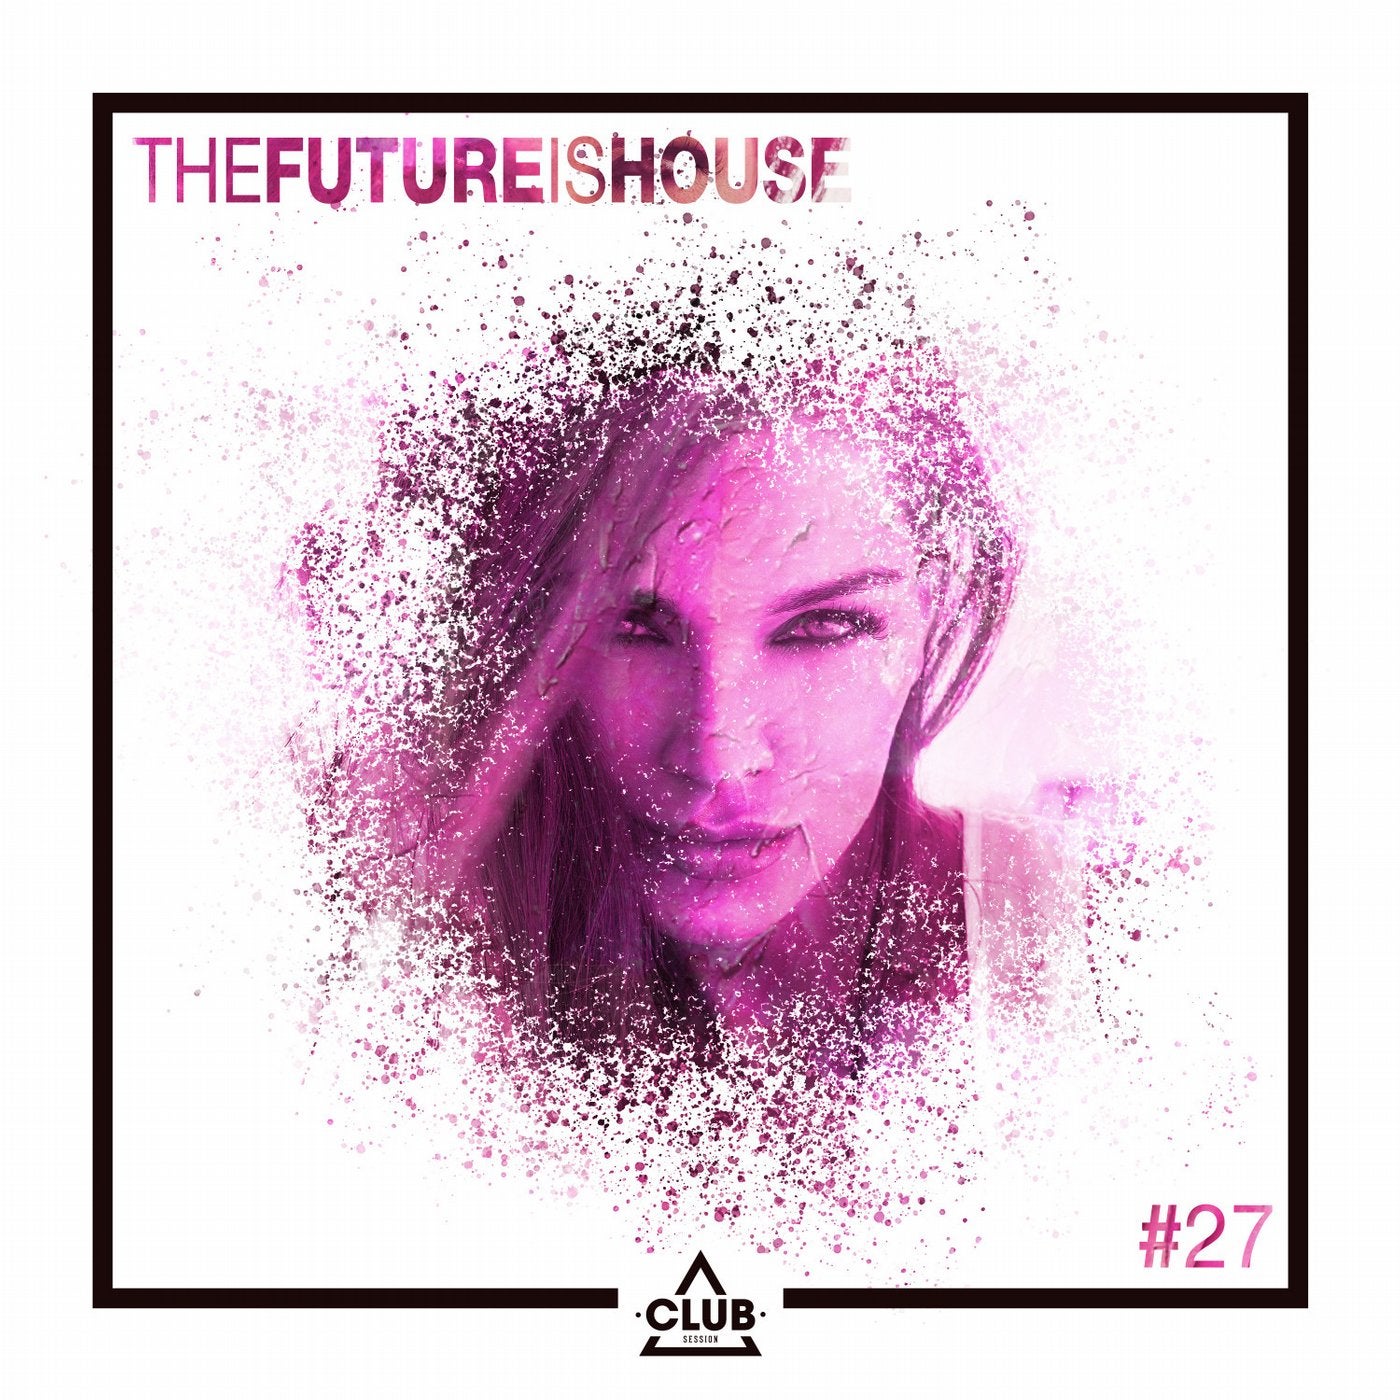 The Future is House #27